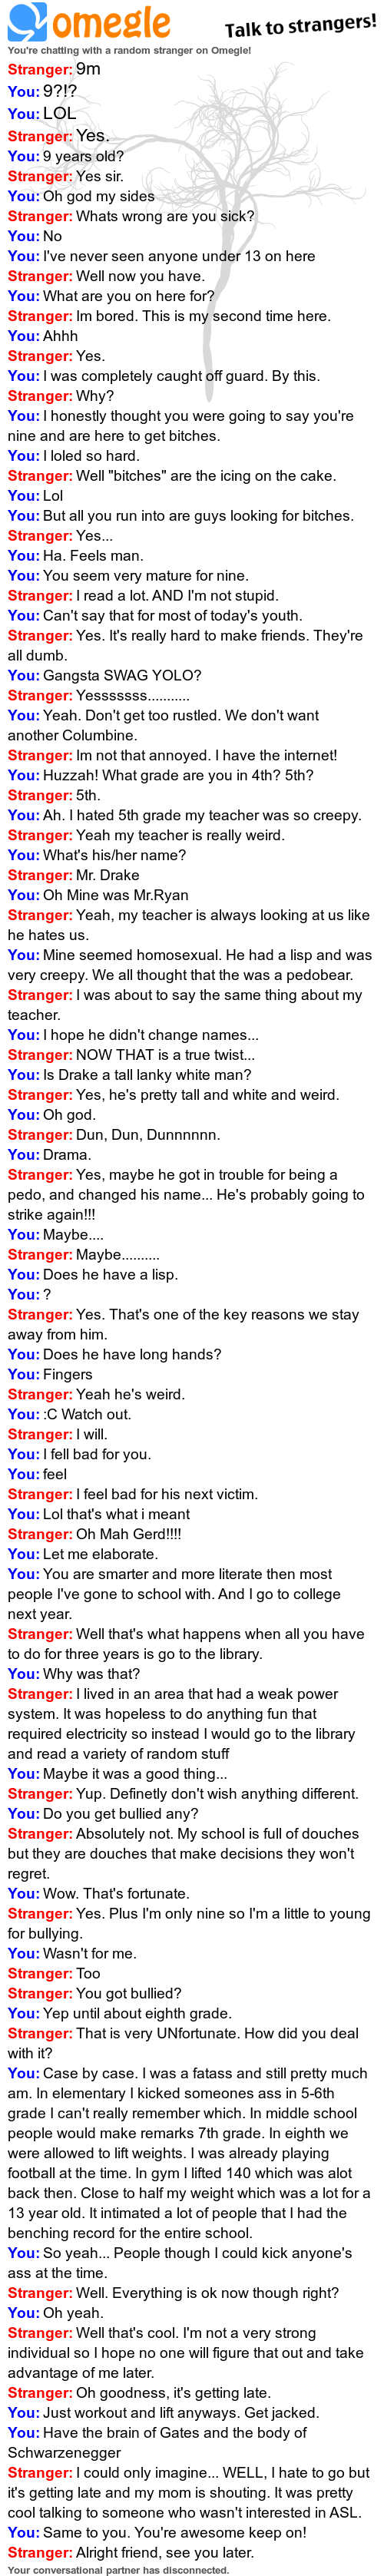 Omegle Chat with a 9 year old. TL;DRI I'm sure this will get thumbed down. But this kid was awesome. He gave me faith where it is lacking in the youth of tomorr